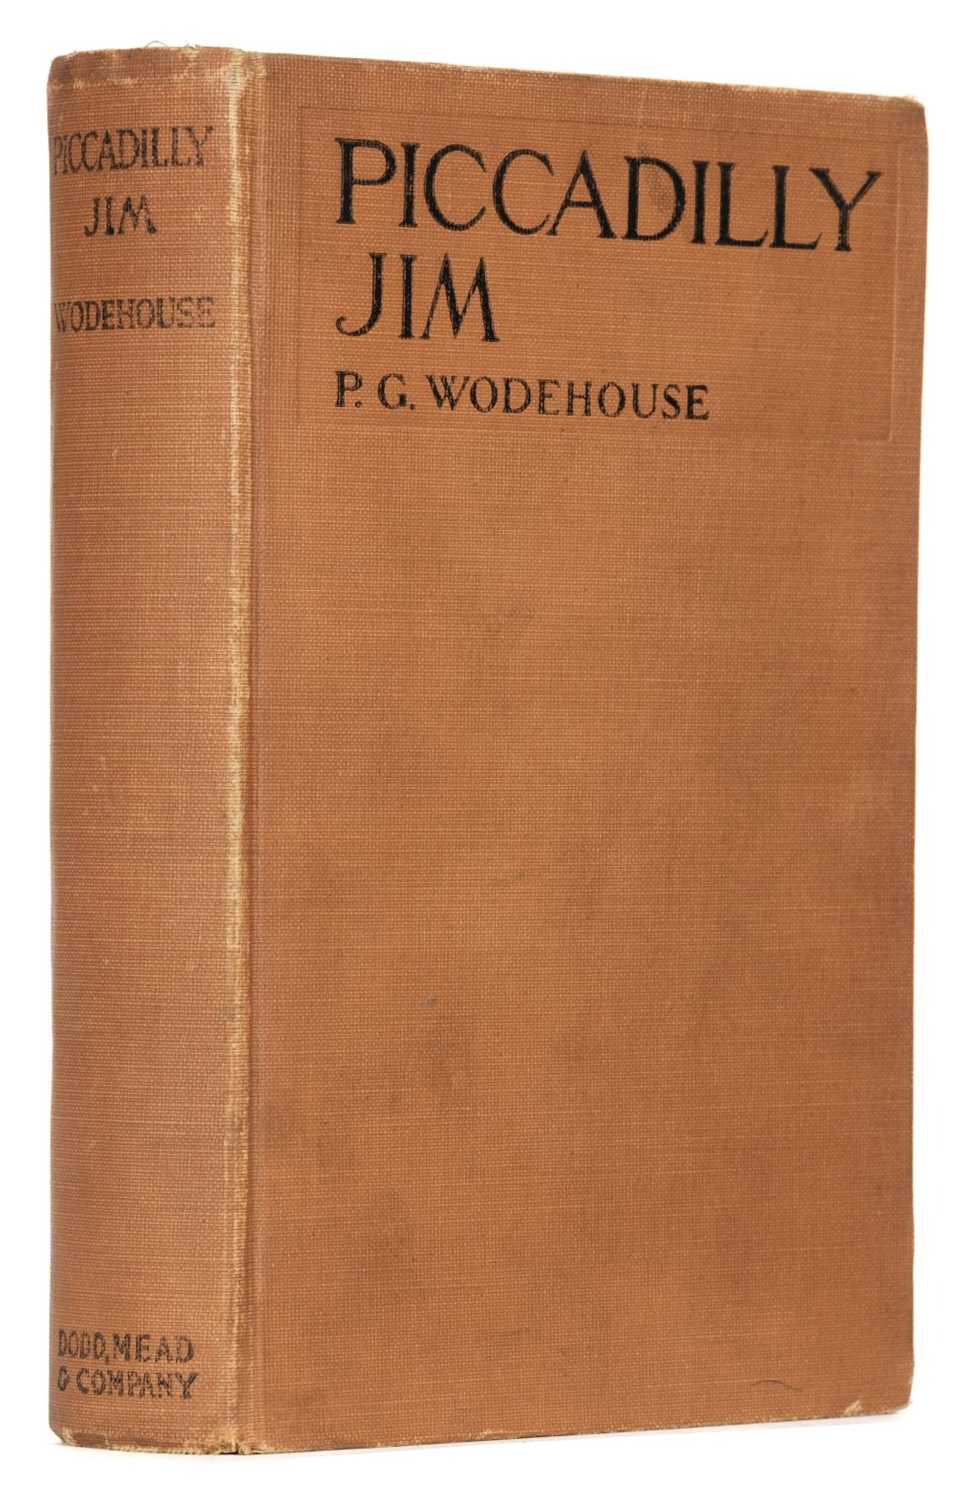 Lot 557 - Wodehouse (P.G.) Piccadilly Jim, 1st US edition, 1917